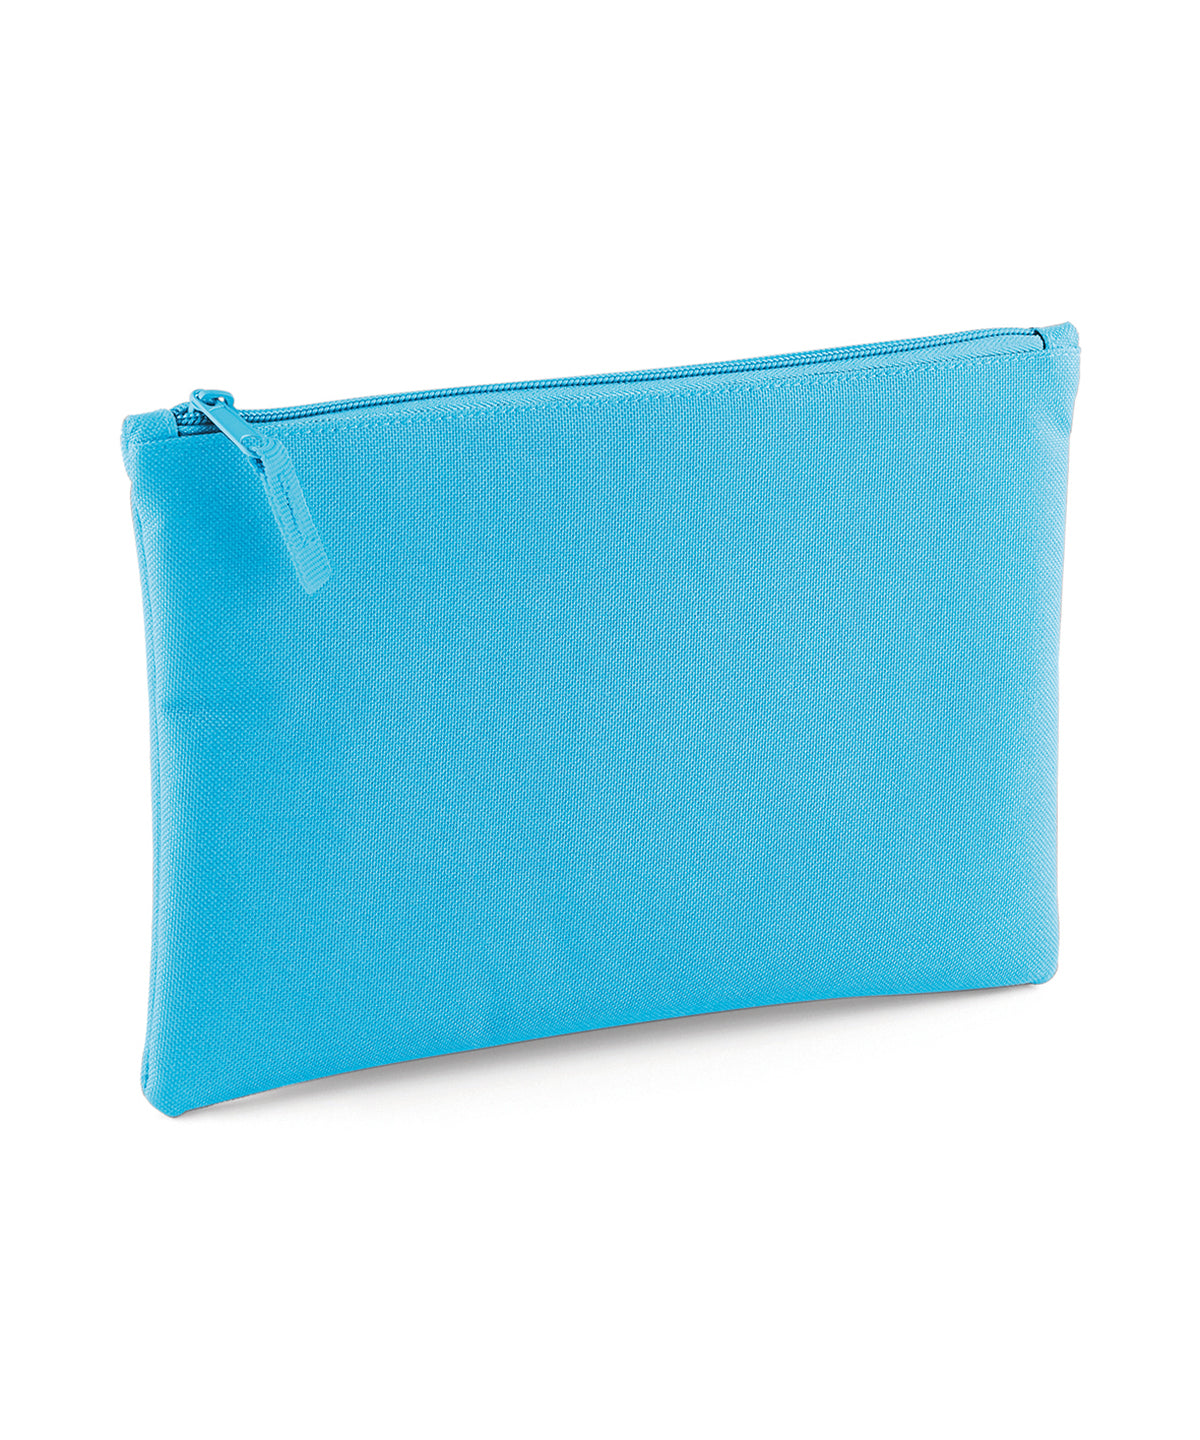 Personalised Bags - Turquoise Bagbase Grab pouch